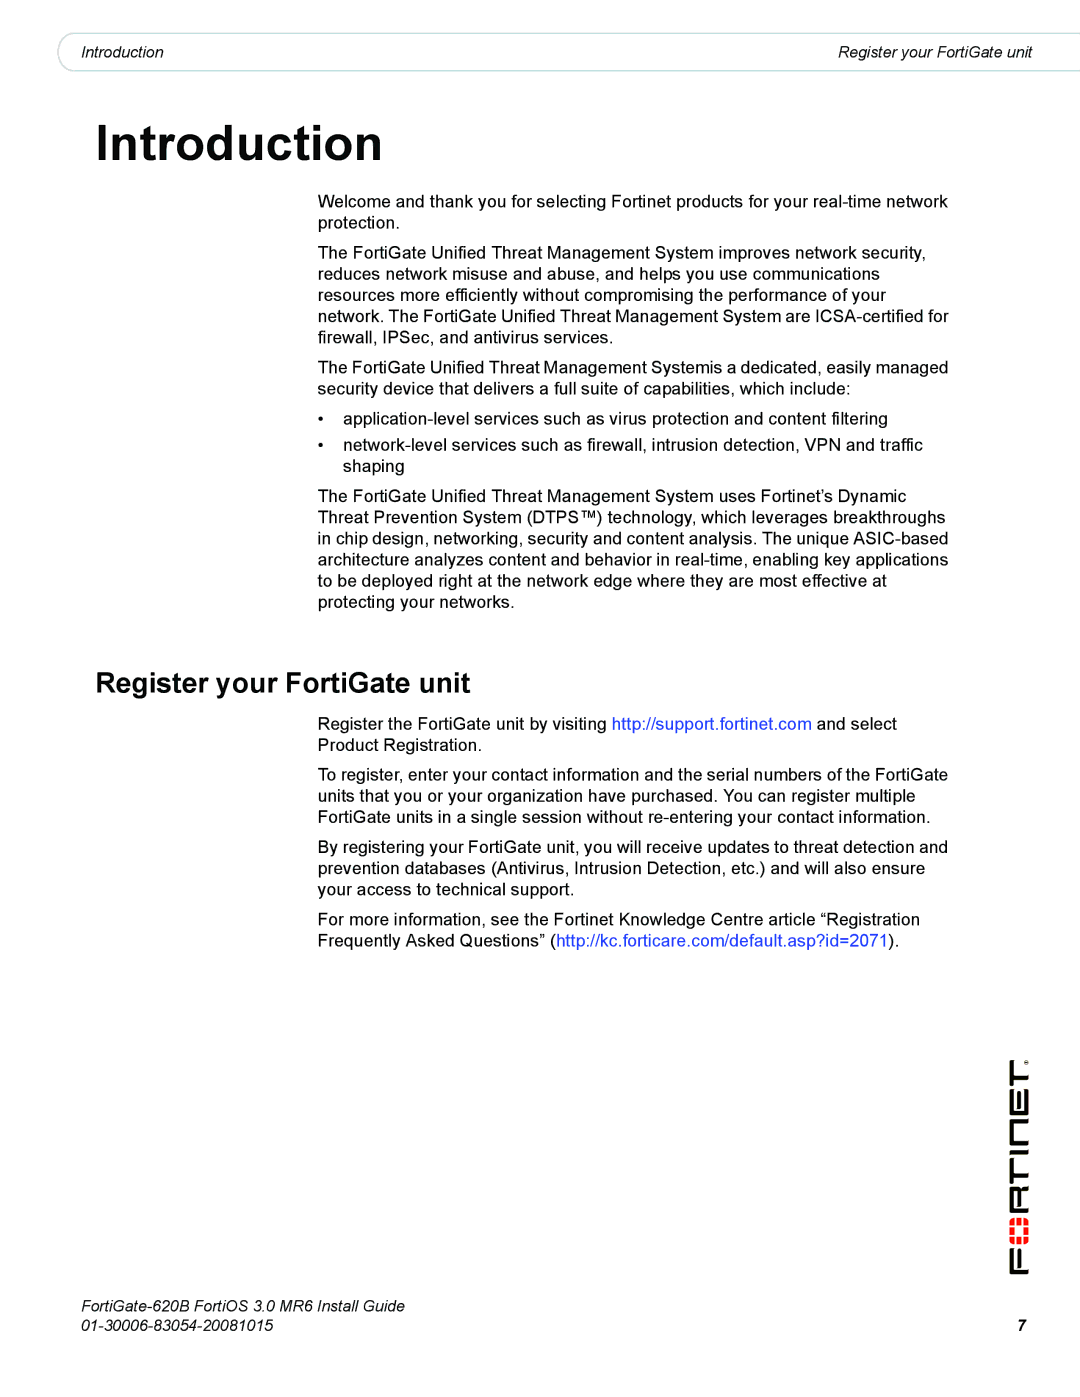 Fortinet 620B manual Introduction, Register your FortiGate unit 